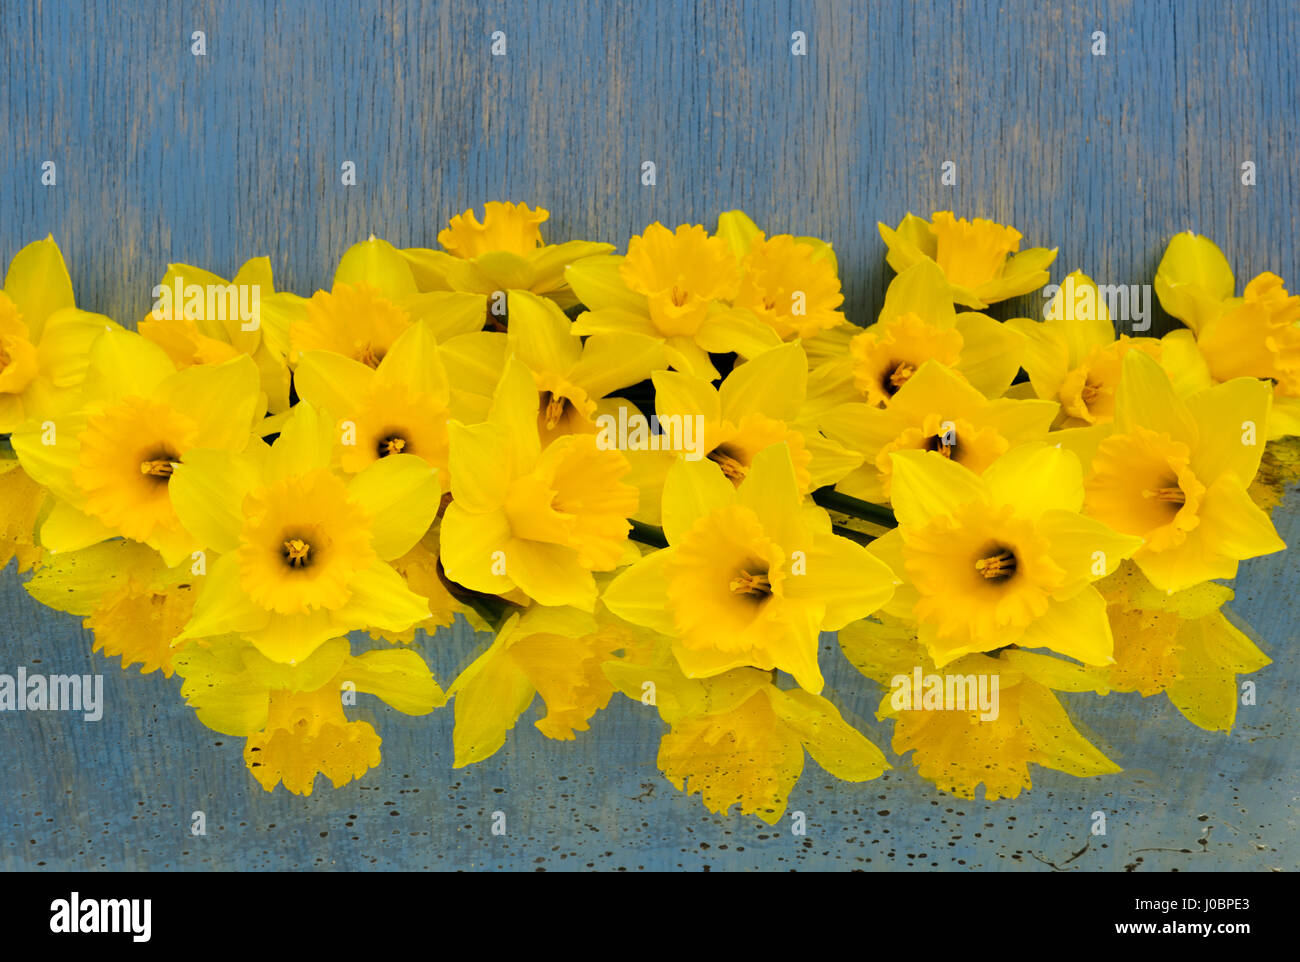 rows of bright yellow daffodil flowers laying on antique mirror with painted blue wood background. looking into the trumpets. Stock Photo